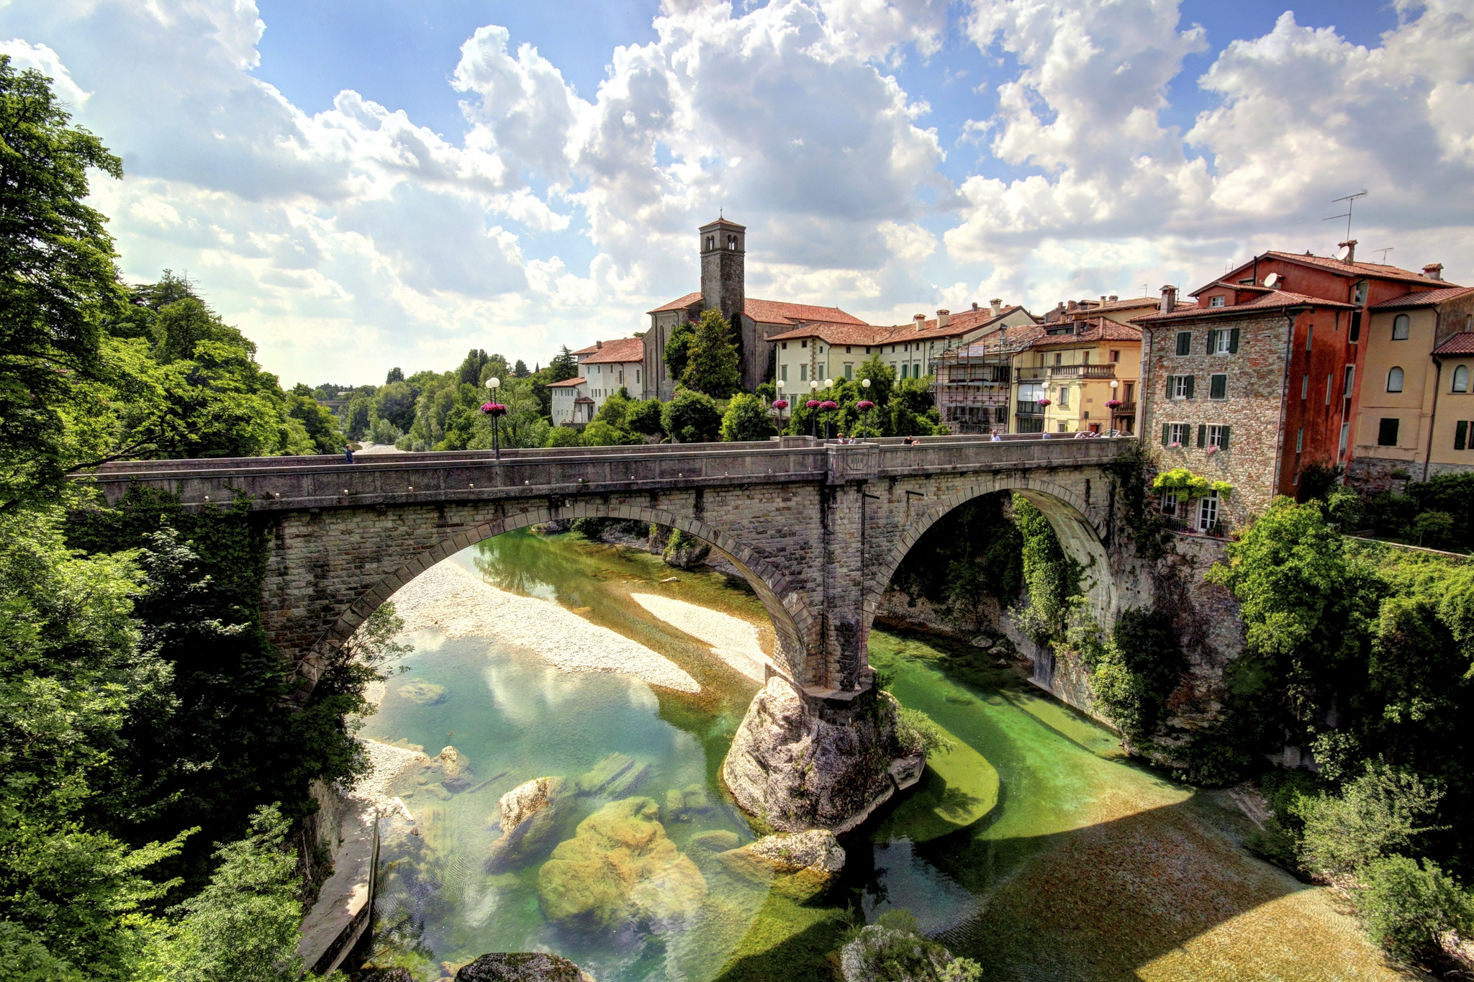 The medieval town of Cividale and the Natisone river